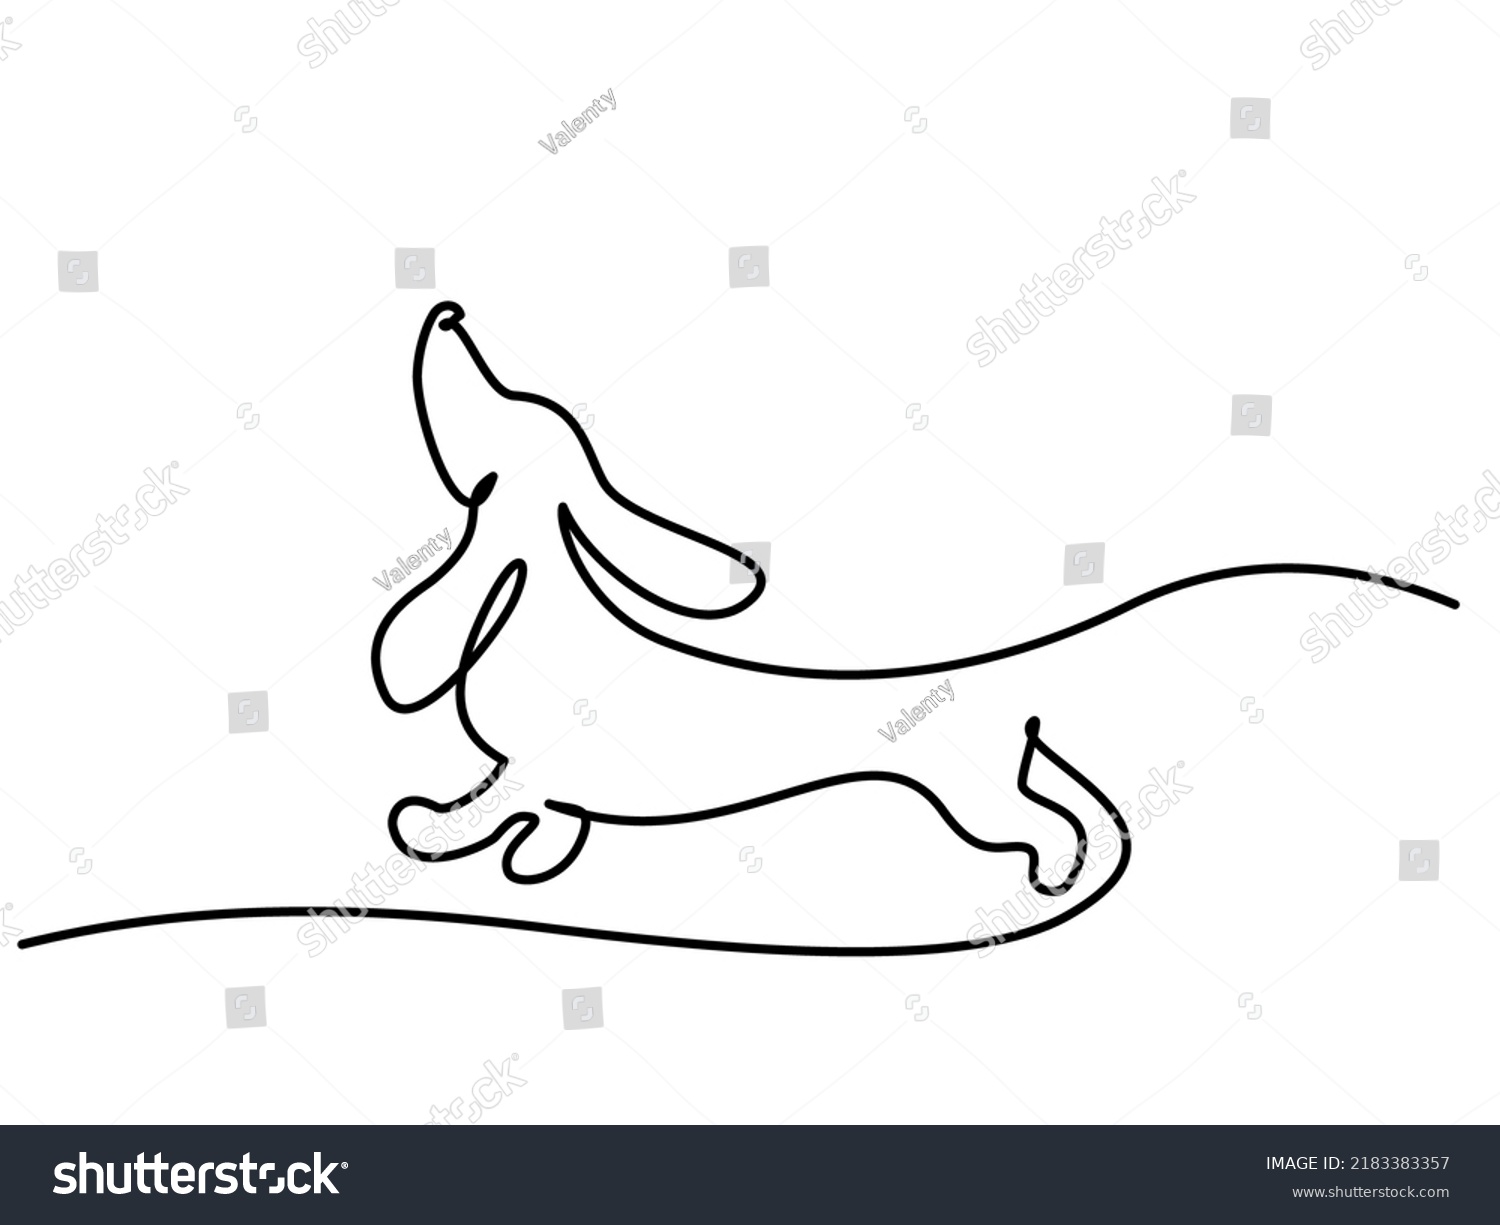 SVG of Dachshund dog running design silhouette logo. Continuous one line drawing. Hand drawn minimalism style vector illustration svg